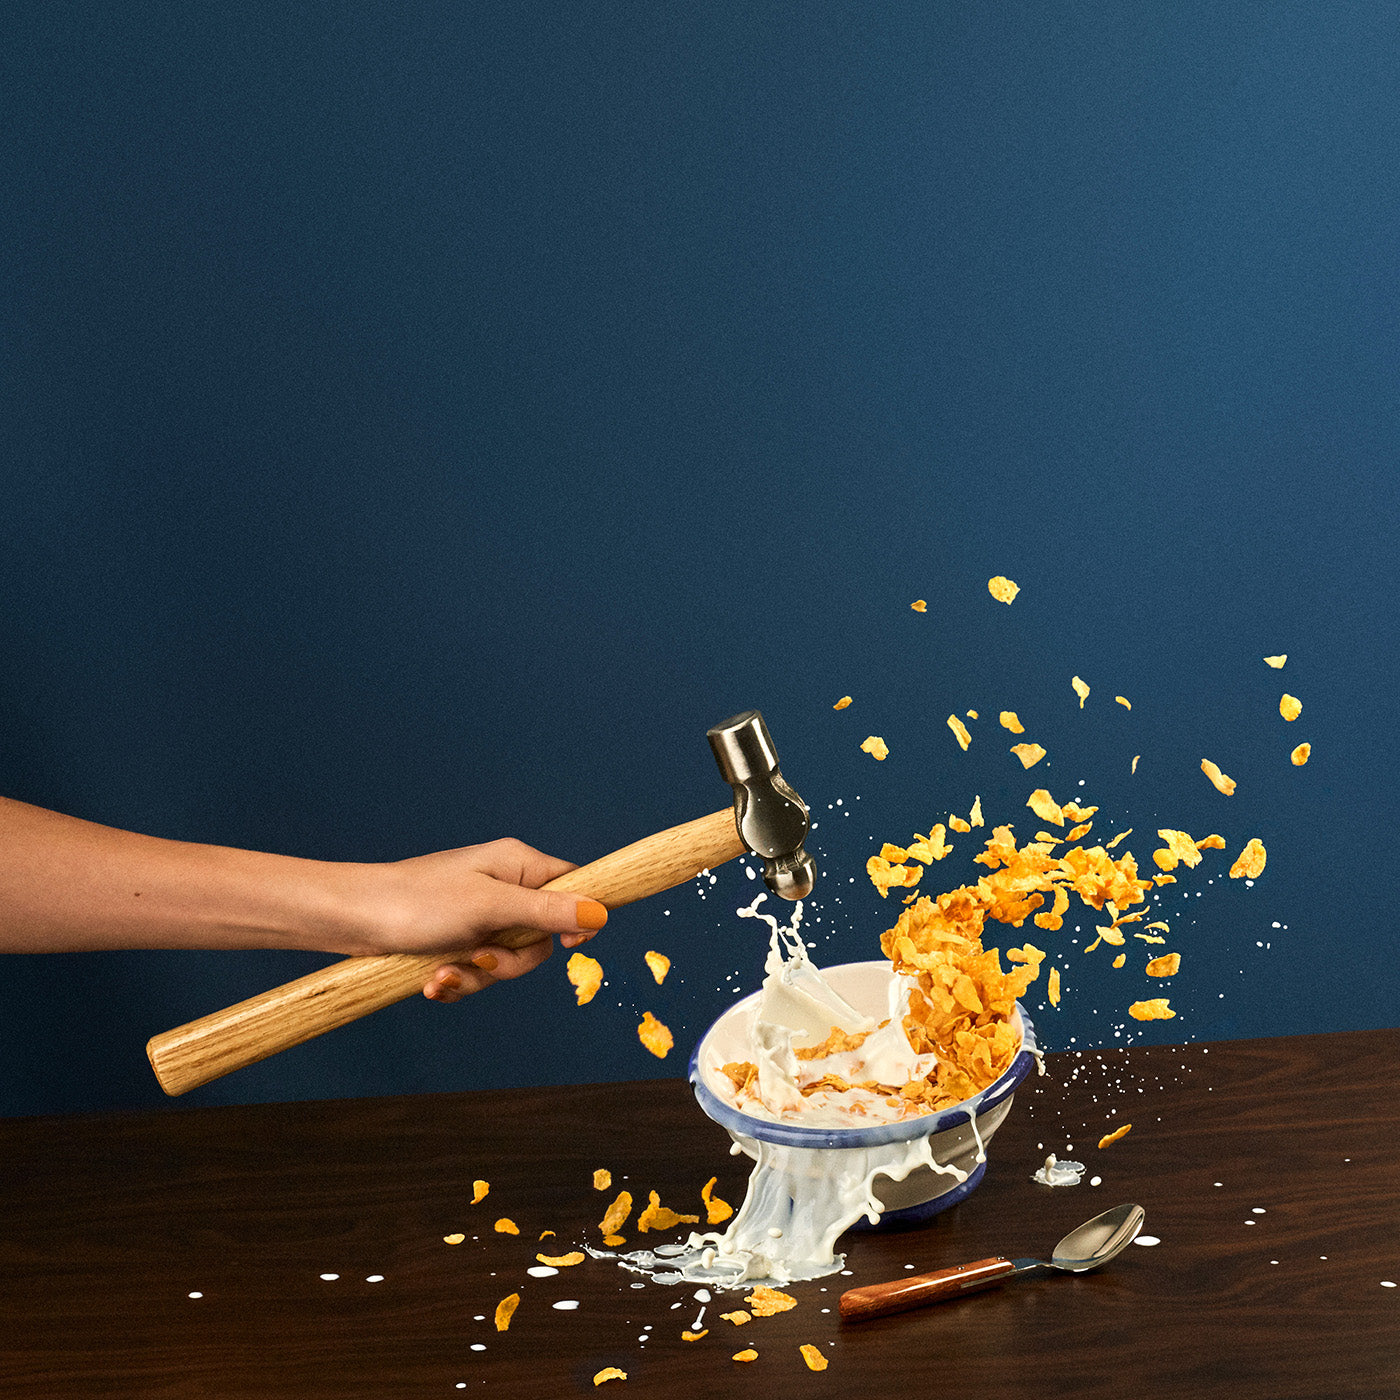 Smashing cereal. An image from Break/Fast by Fragmento Universo 